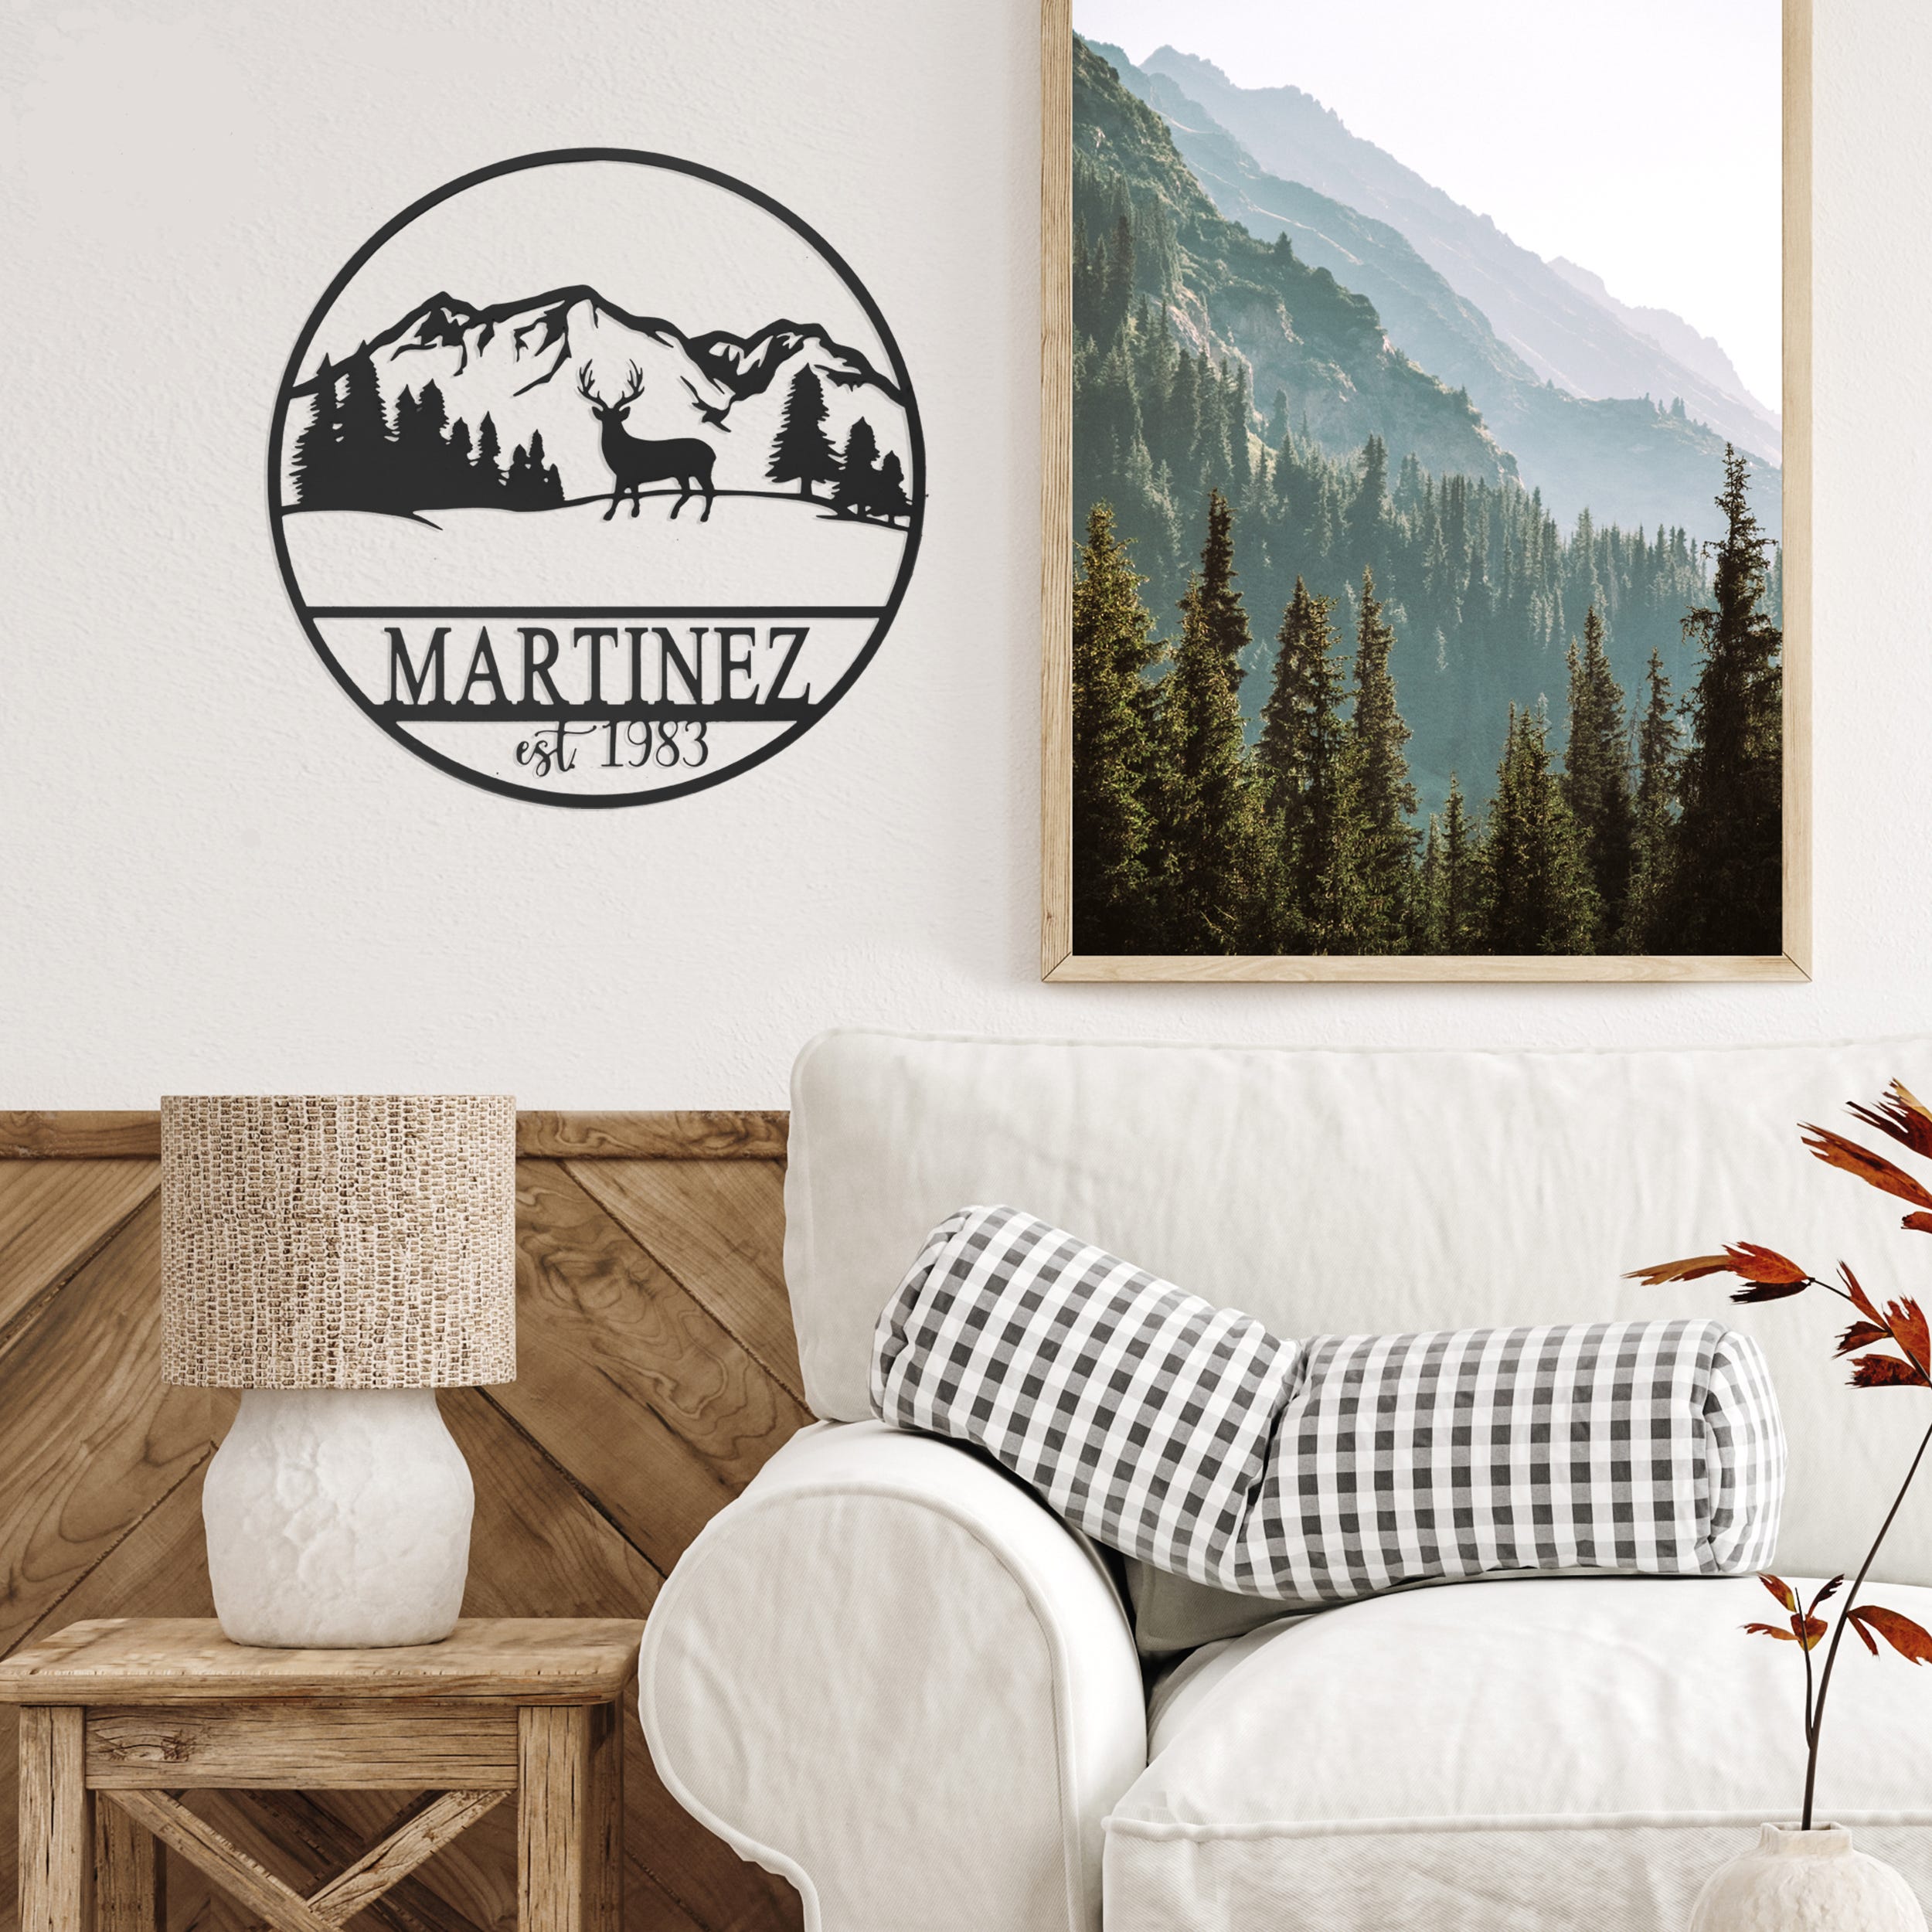 A personalized wall sign beside a framed scenic forest photograph, above a side table with a lamp, and a white armchair with a checkered pillow.